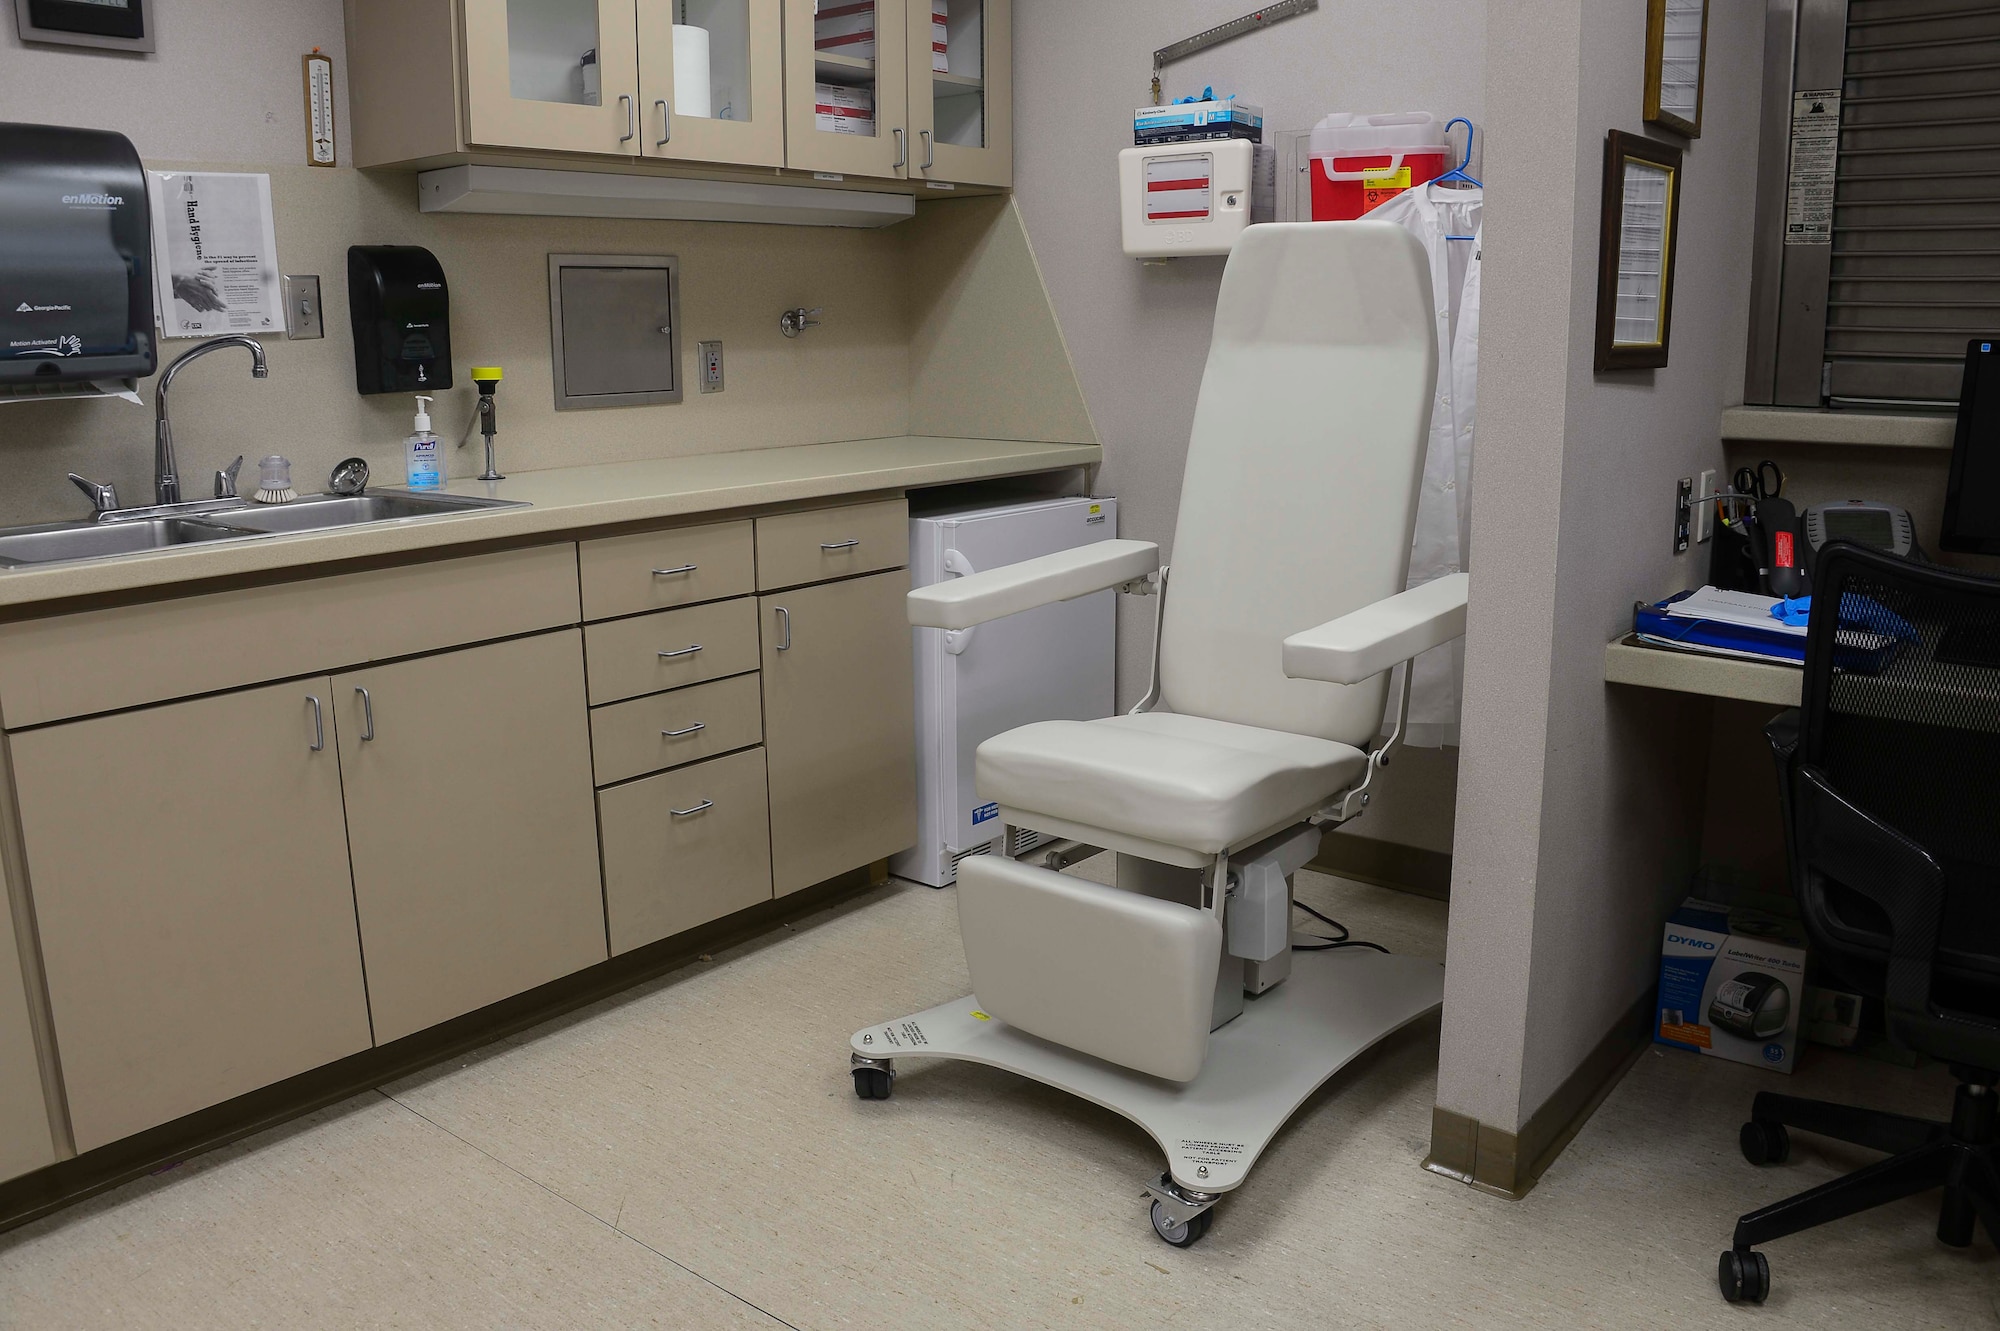 The new ergonomic chair will help prevent patients who tend to faint while getting blood drawn from passing out.  It was installed at the 137th Medical Group, Aug. 12, 2016, in their facilities at Will Rogers Air National Guard Base in Oklahoma City as part of the Air National Guard Medical Service medical equipment modernization program. (U.S. Air National Guard photo by Senior Airman Brigette Waltermire)